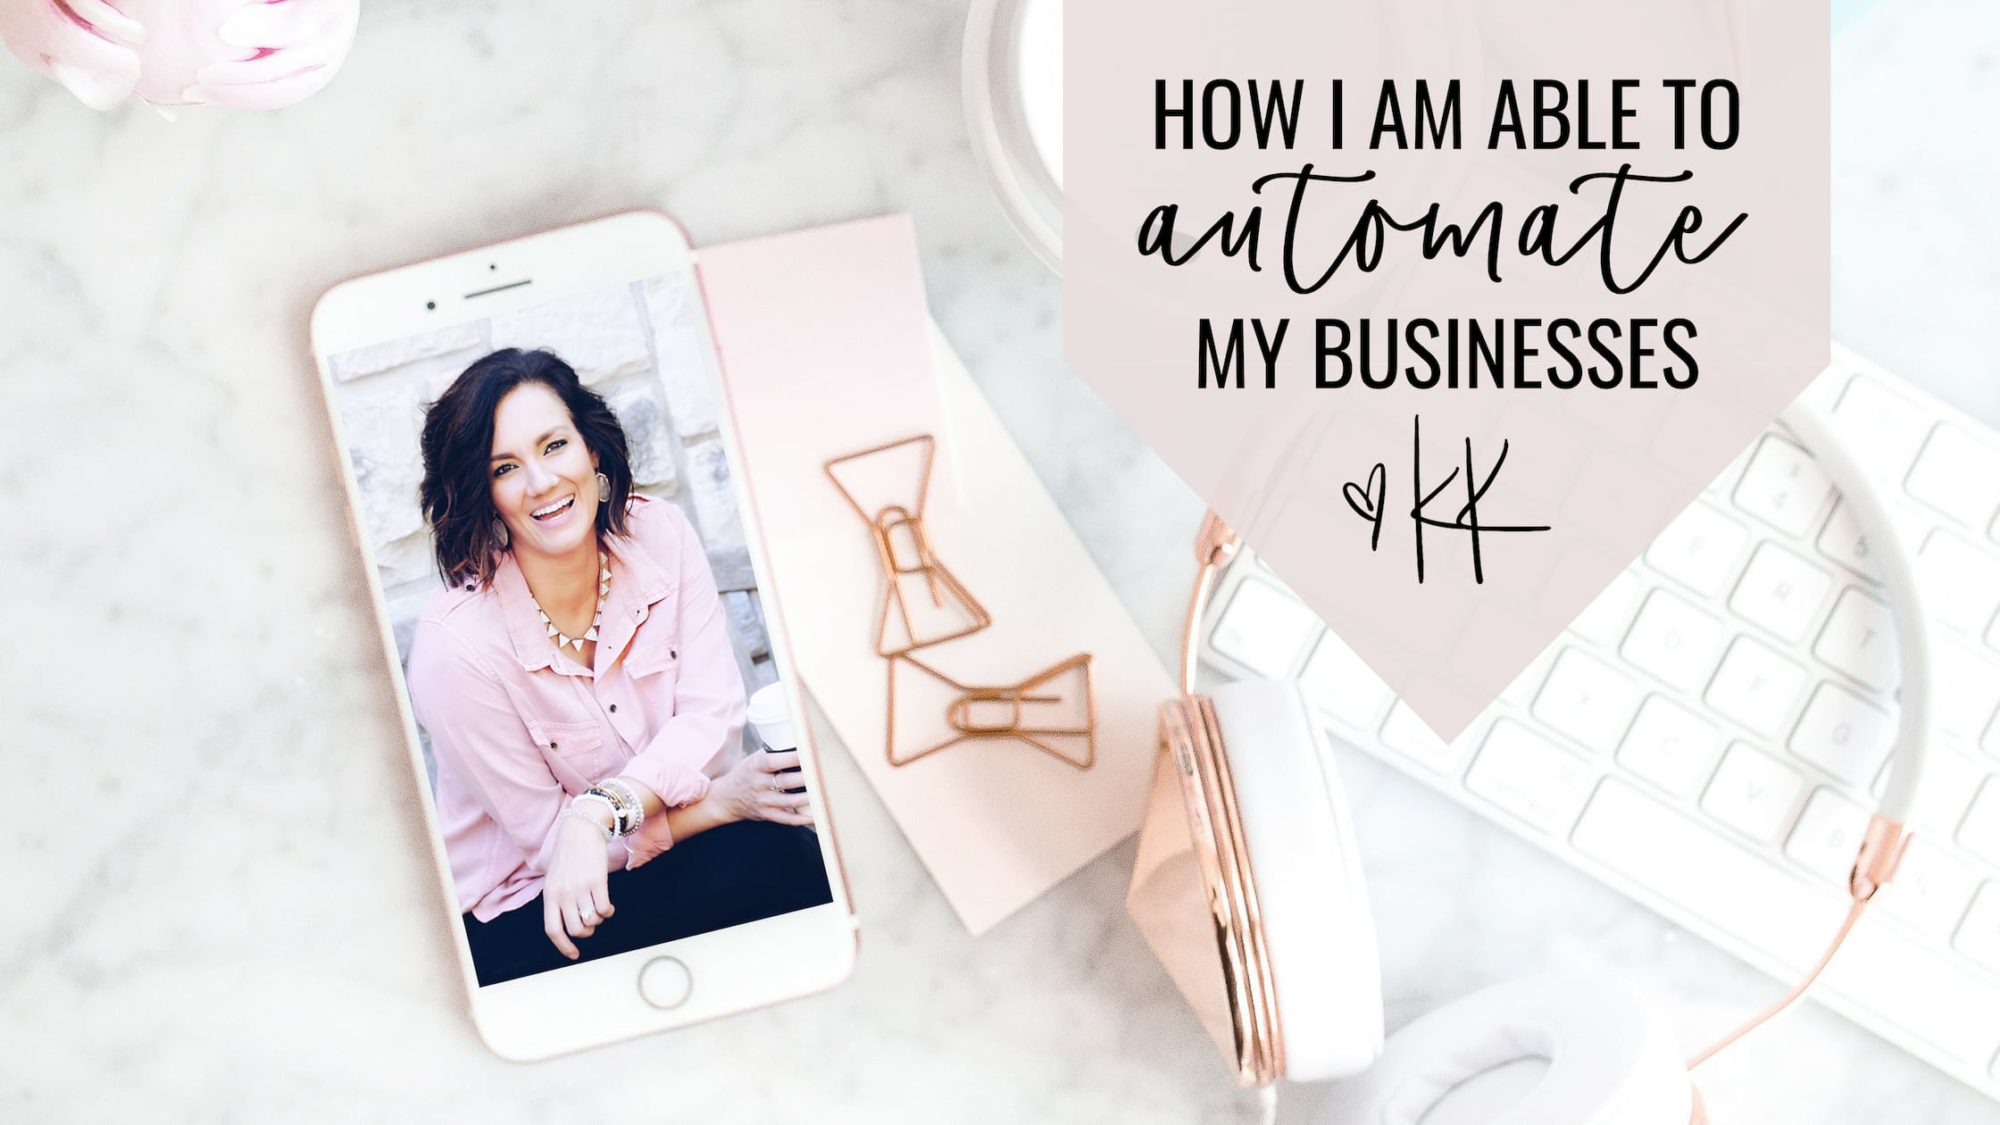 Ways to automate your business to give yourself more time freedom.